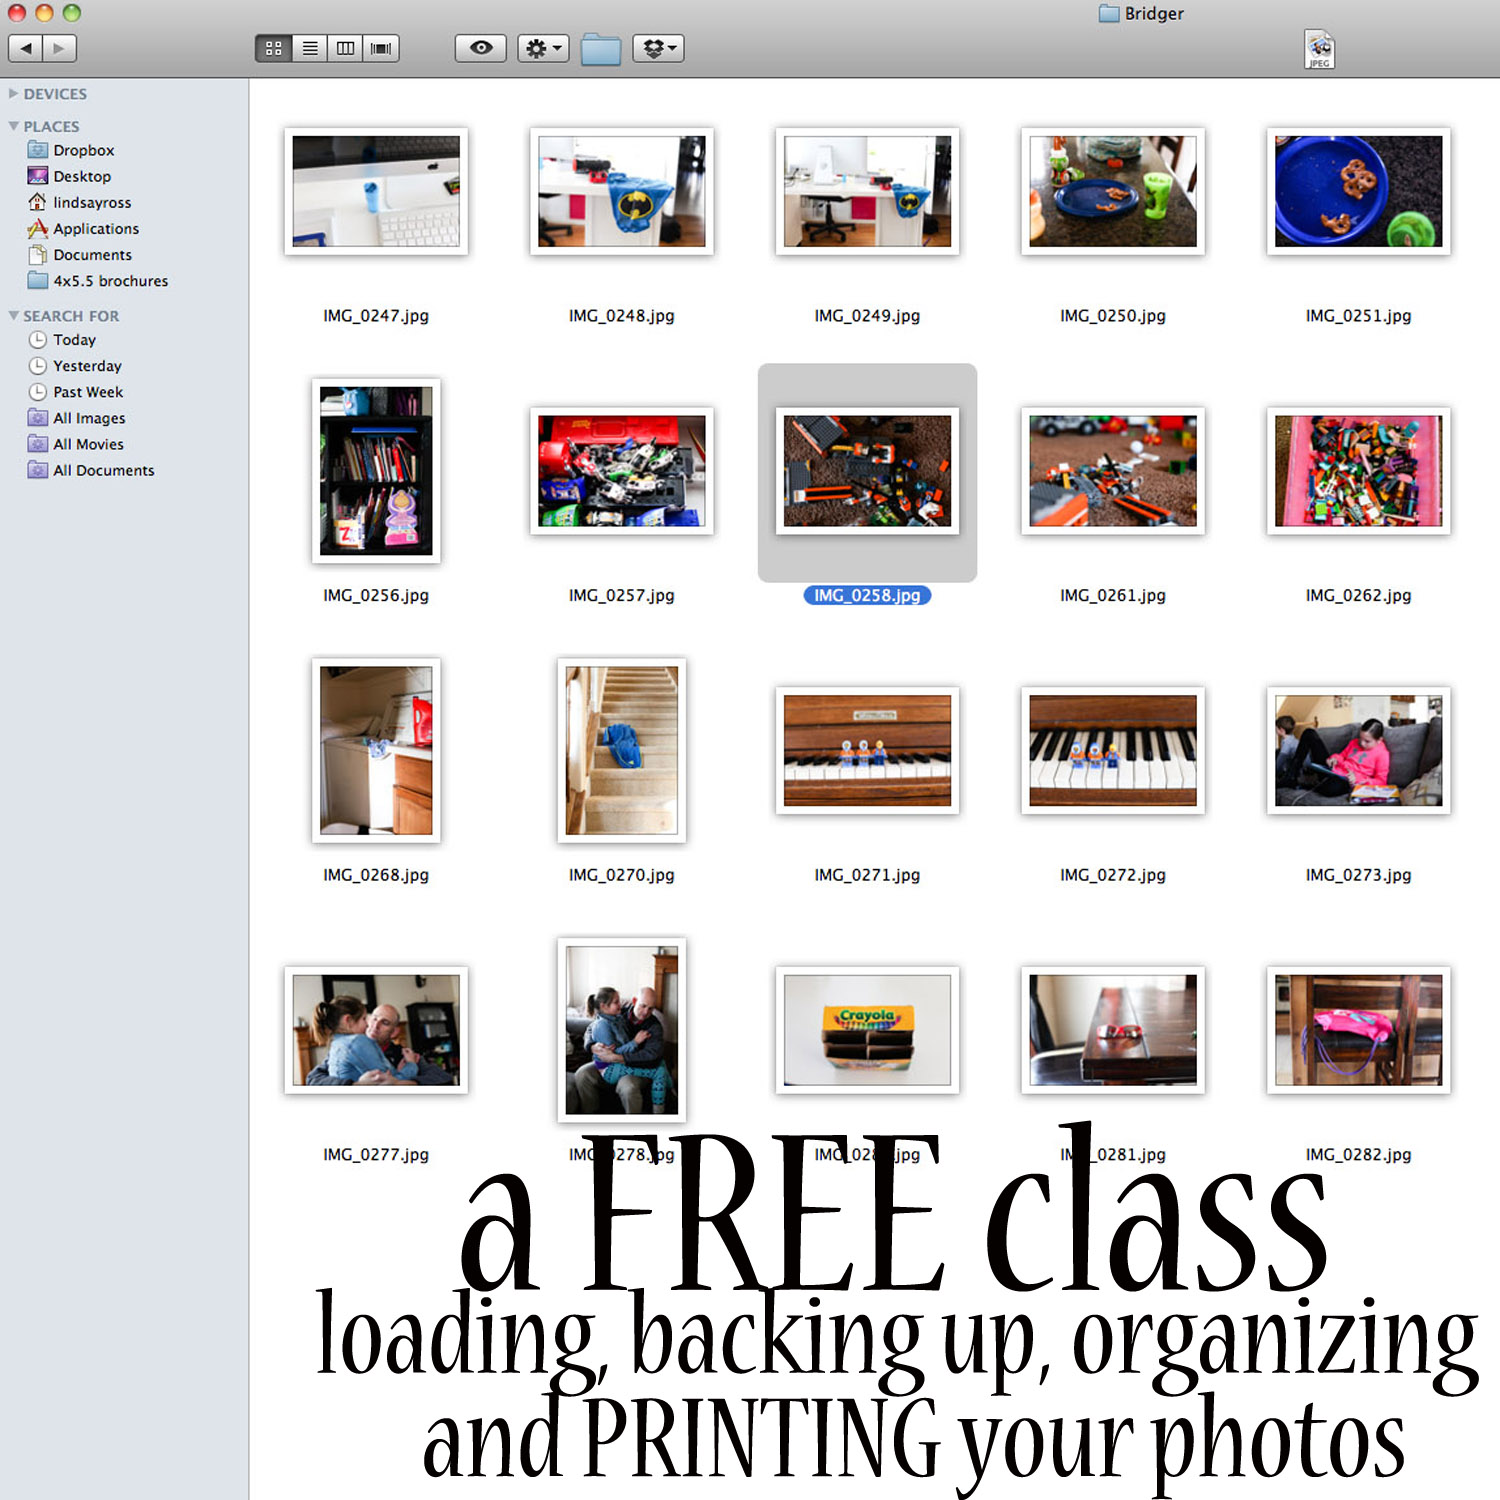 a FREE class (load, backup, organize, and print photos)